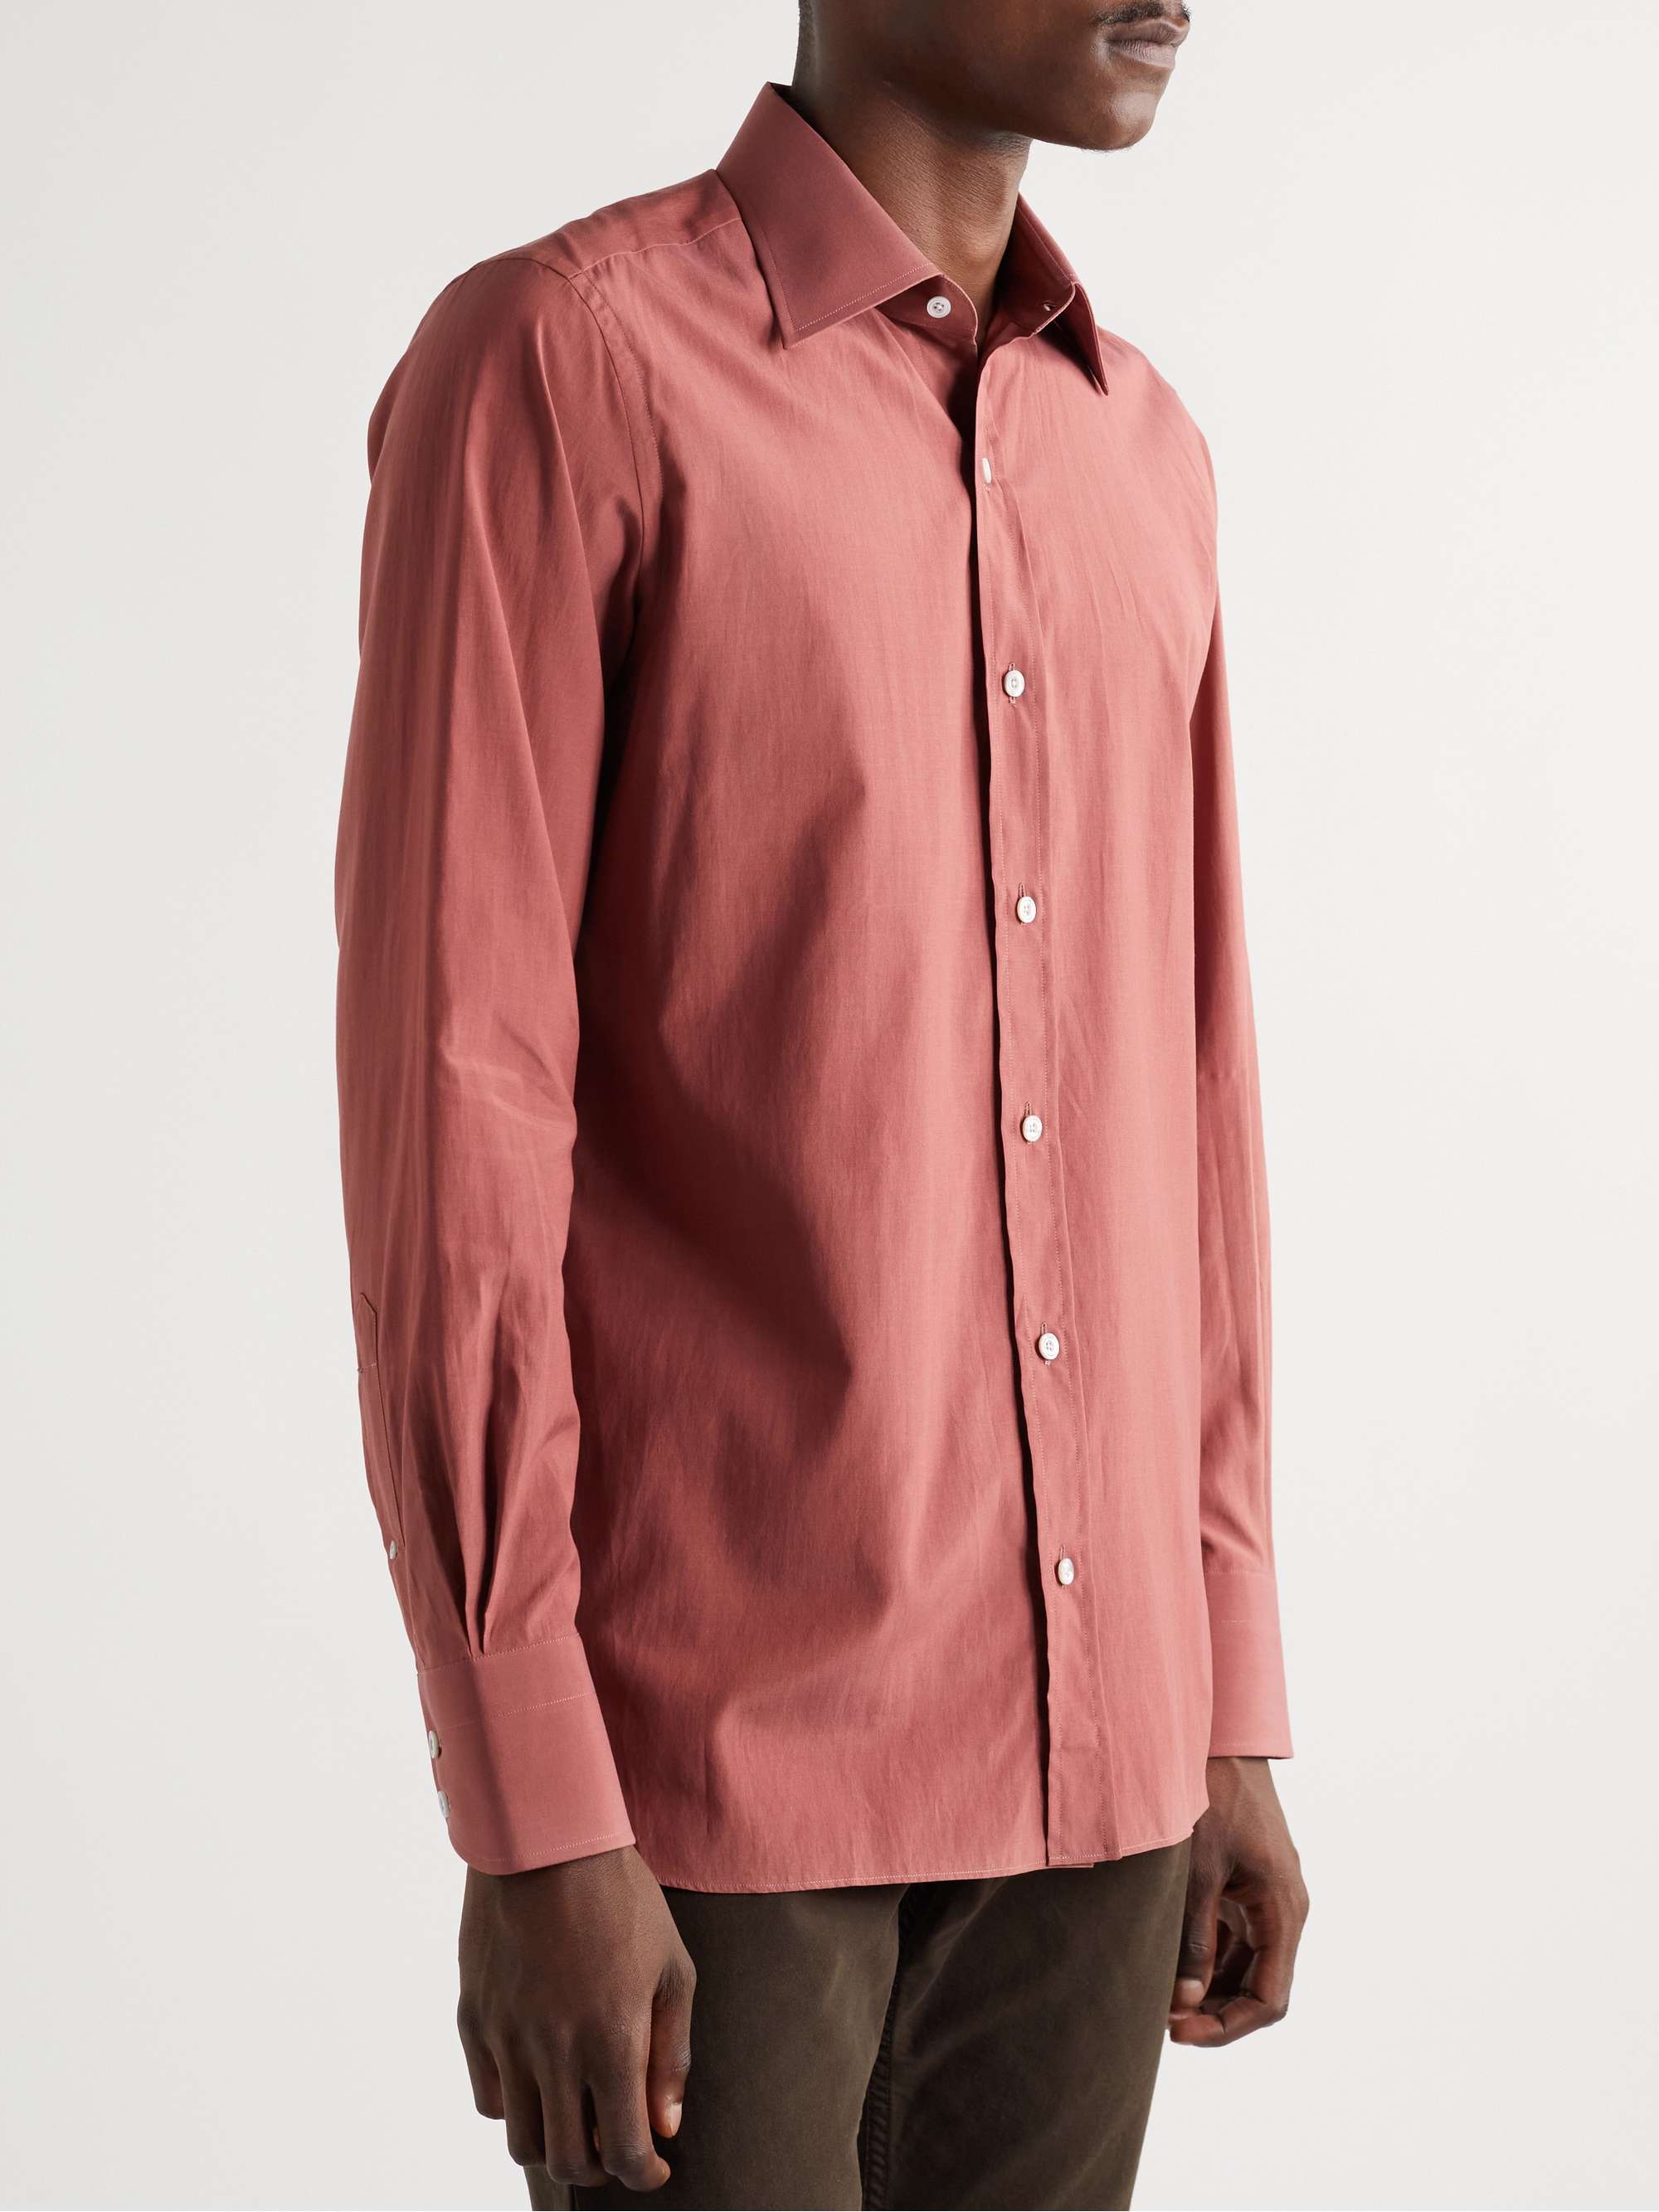 TOM FORD Slim-Fit Button-Down Collar Silk and Cotton-Blend Shirt